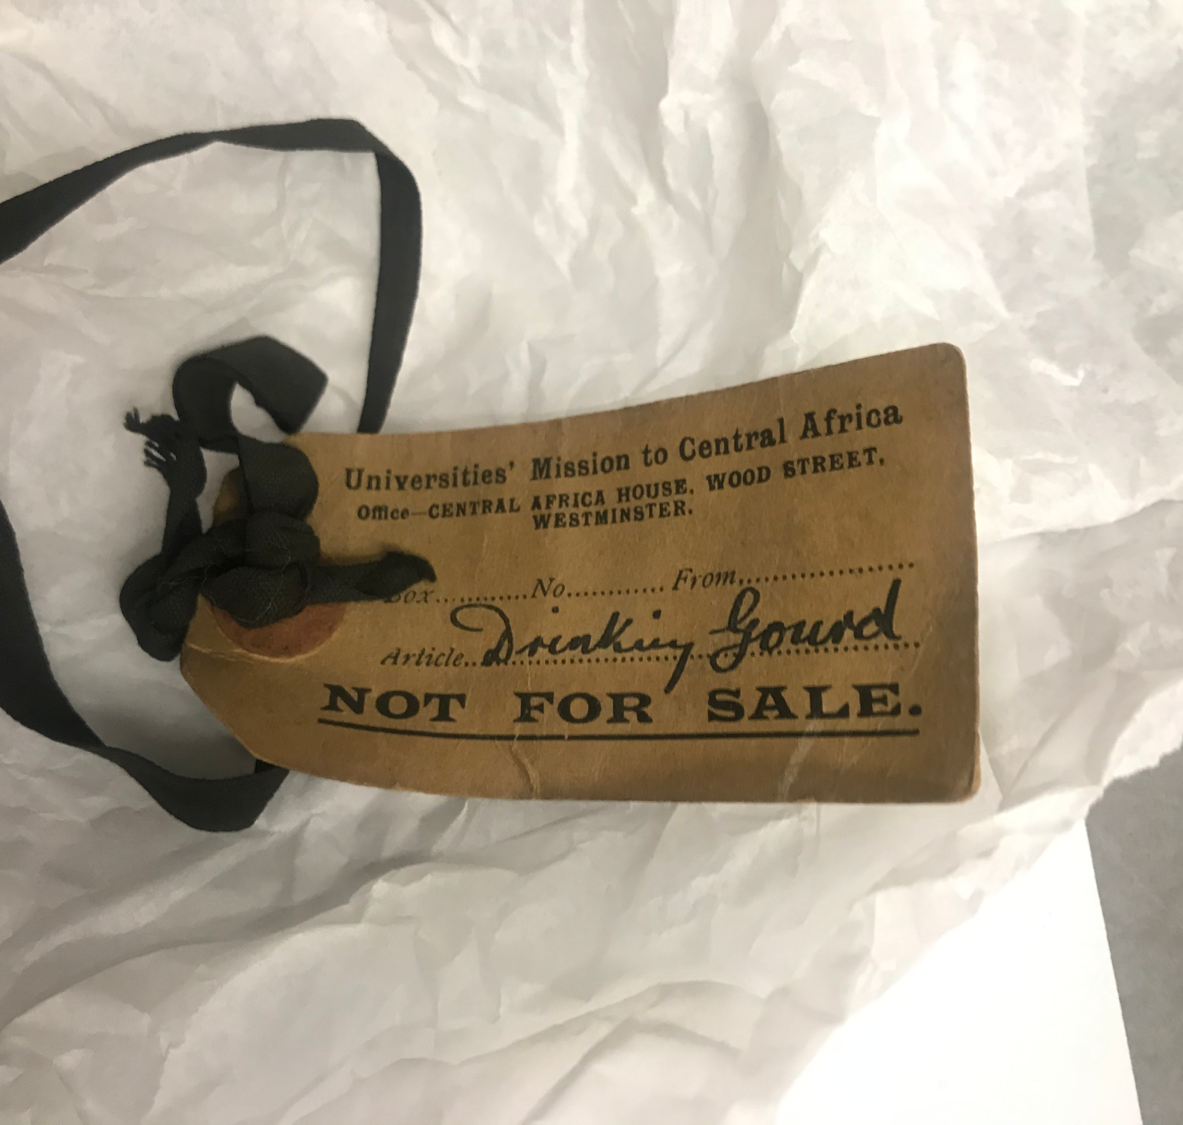  A label on aged paper with a leather thong tied through one end. The label reads: “Universities’ Mission to Central Africa Office- Central Africa House, Wood Street, West Minster Box....No.....From....Article Drinking Gourd NOT FOR SALE”. 